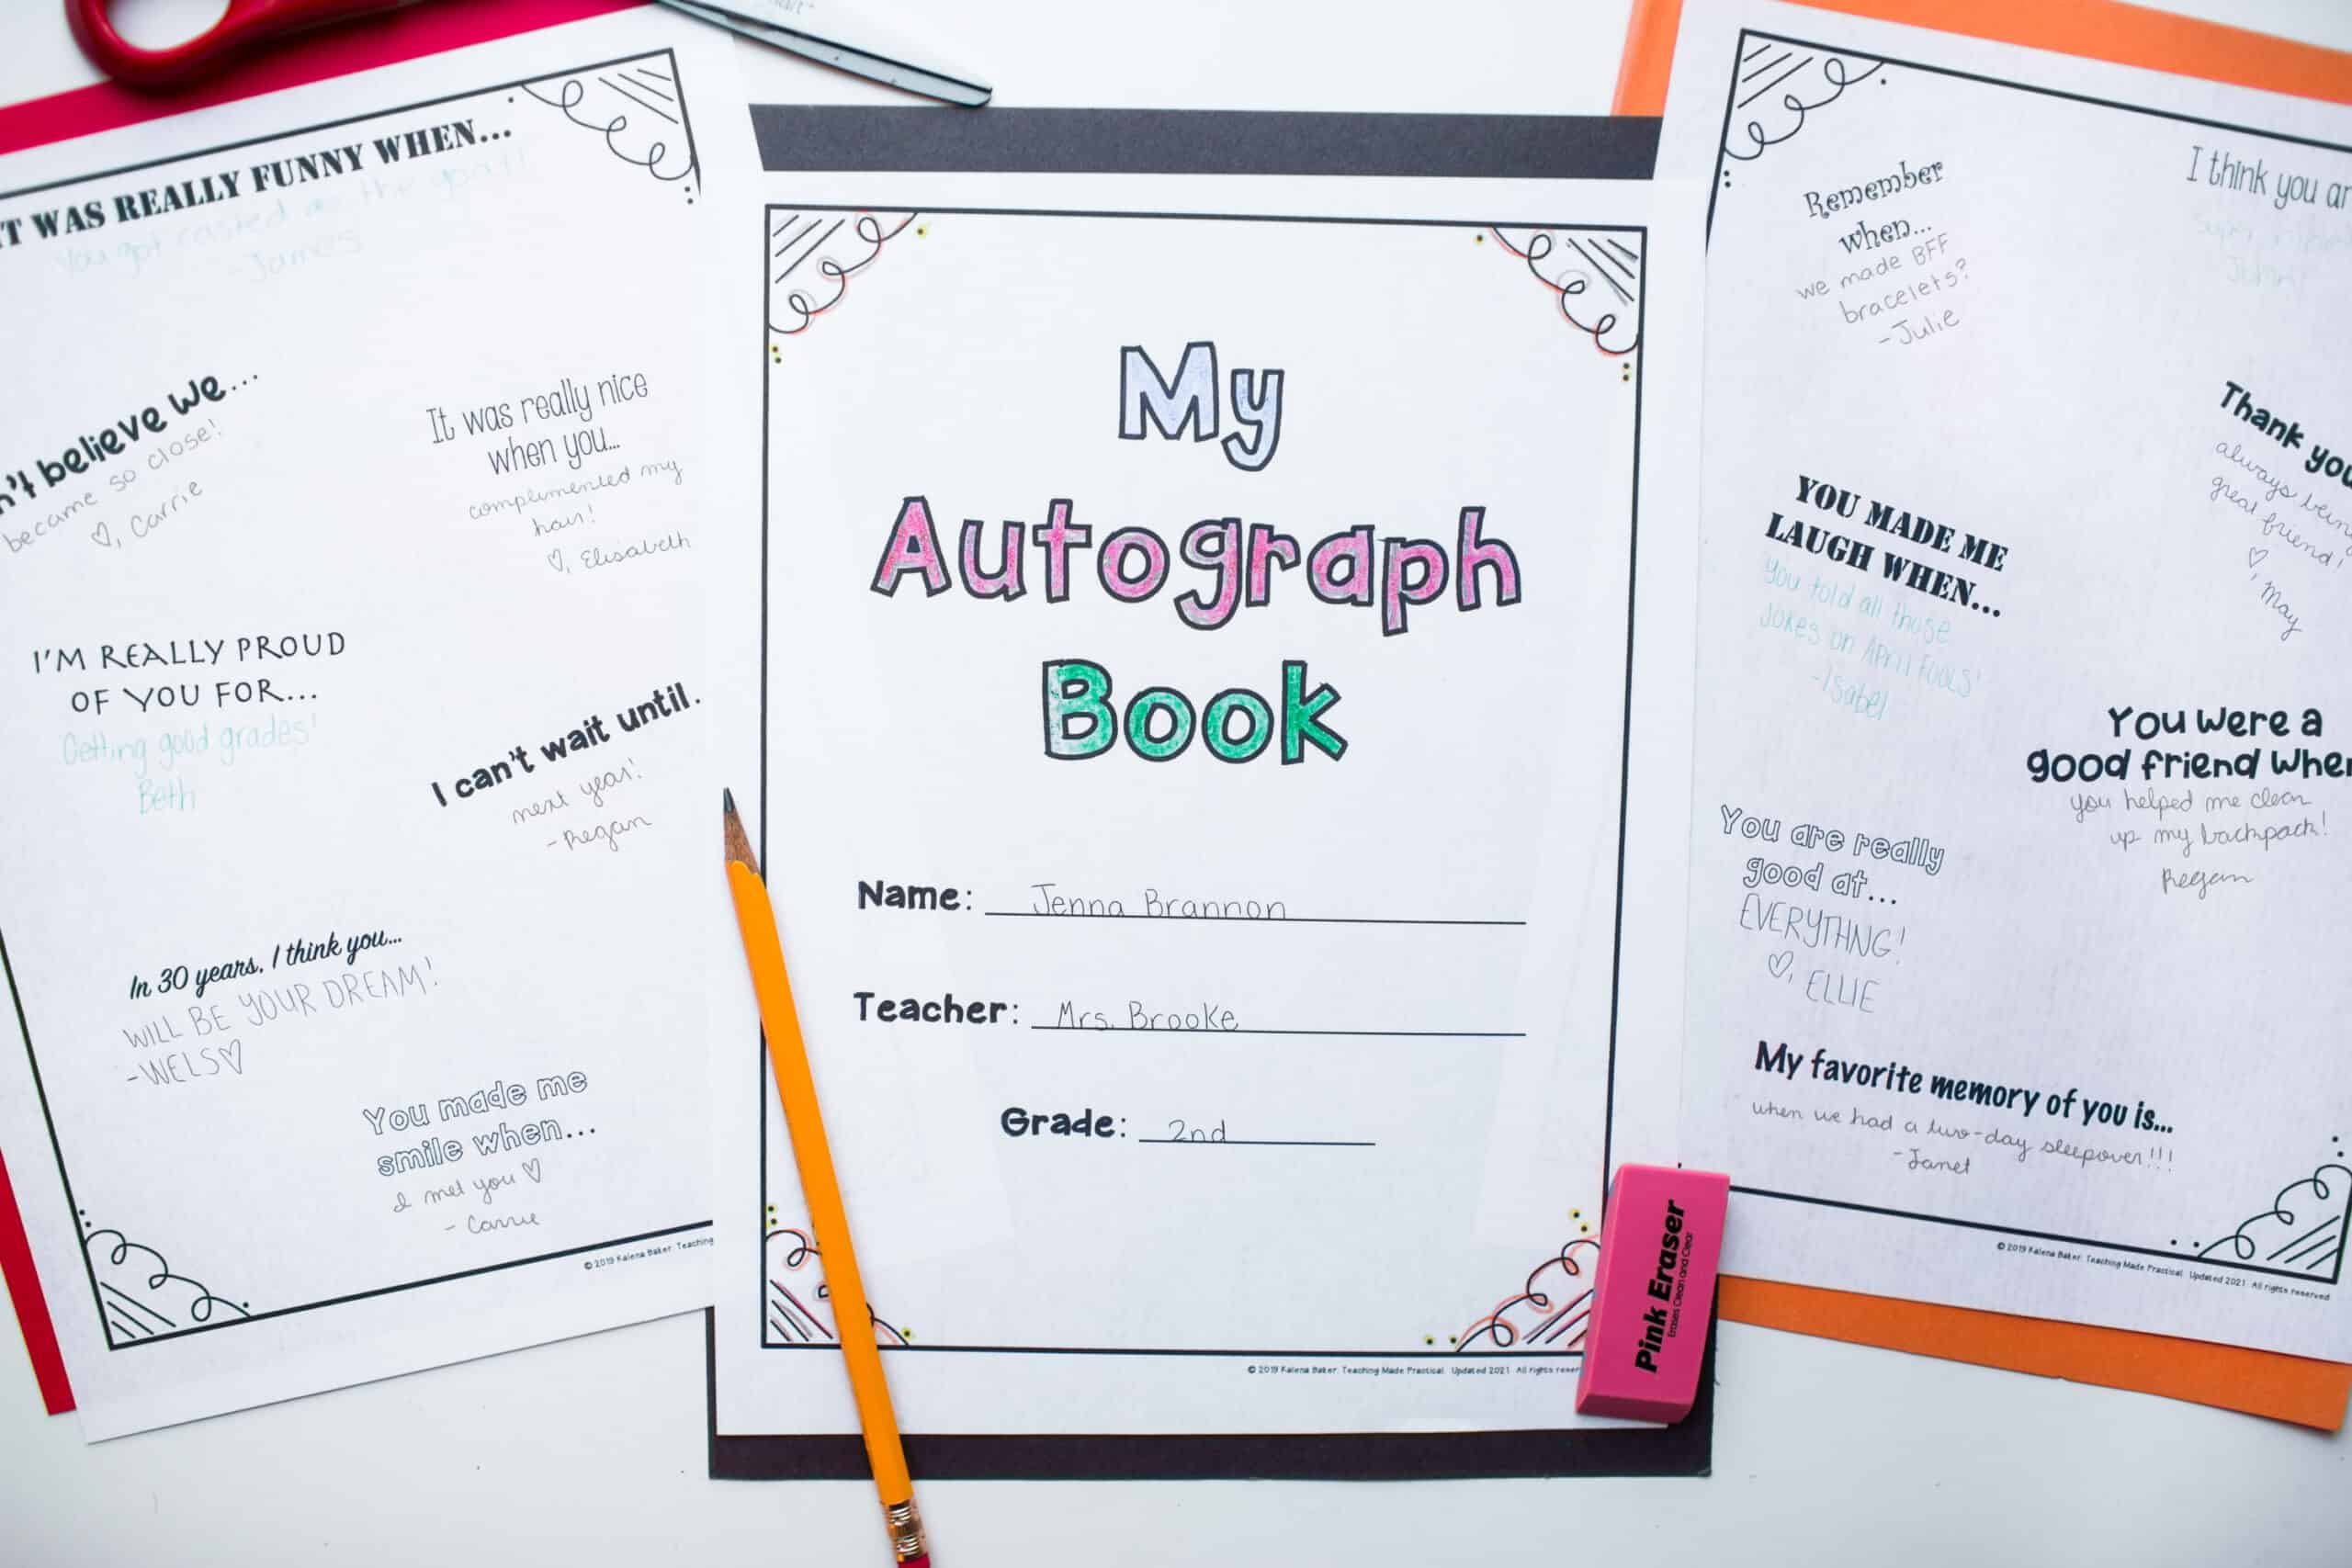 an end of year autograph book for upper elementary students that helps them share meaningful compliments and memories